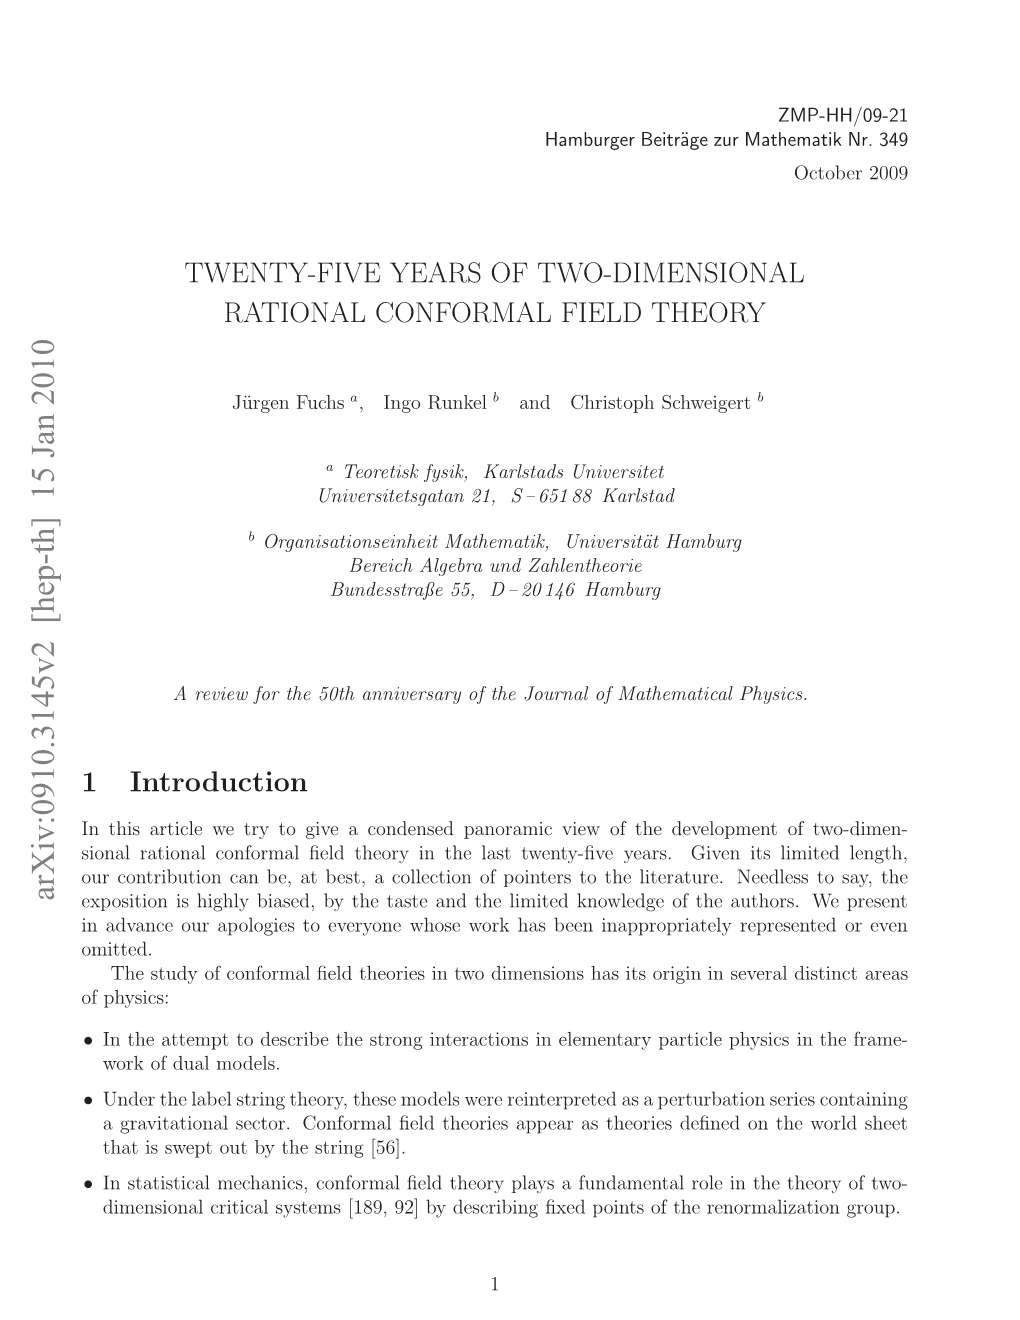 Twenty-Five Years of Two-Dimensional Rational Conformal Field Theory